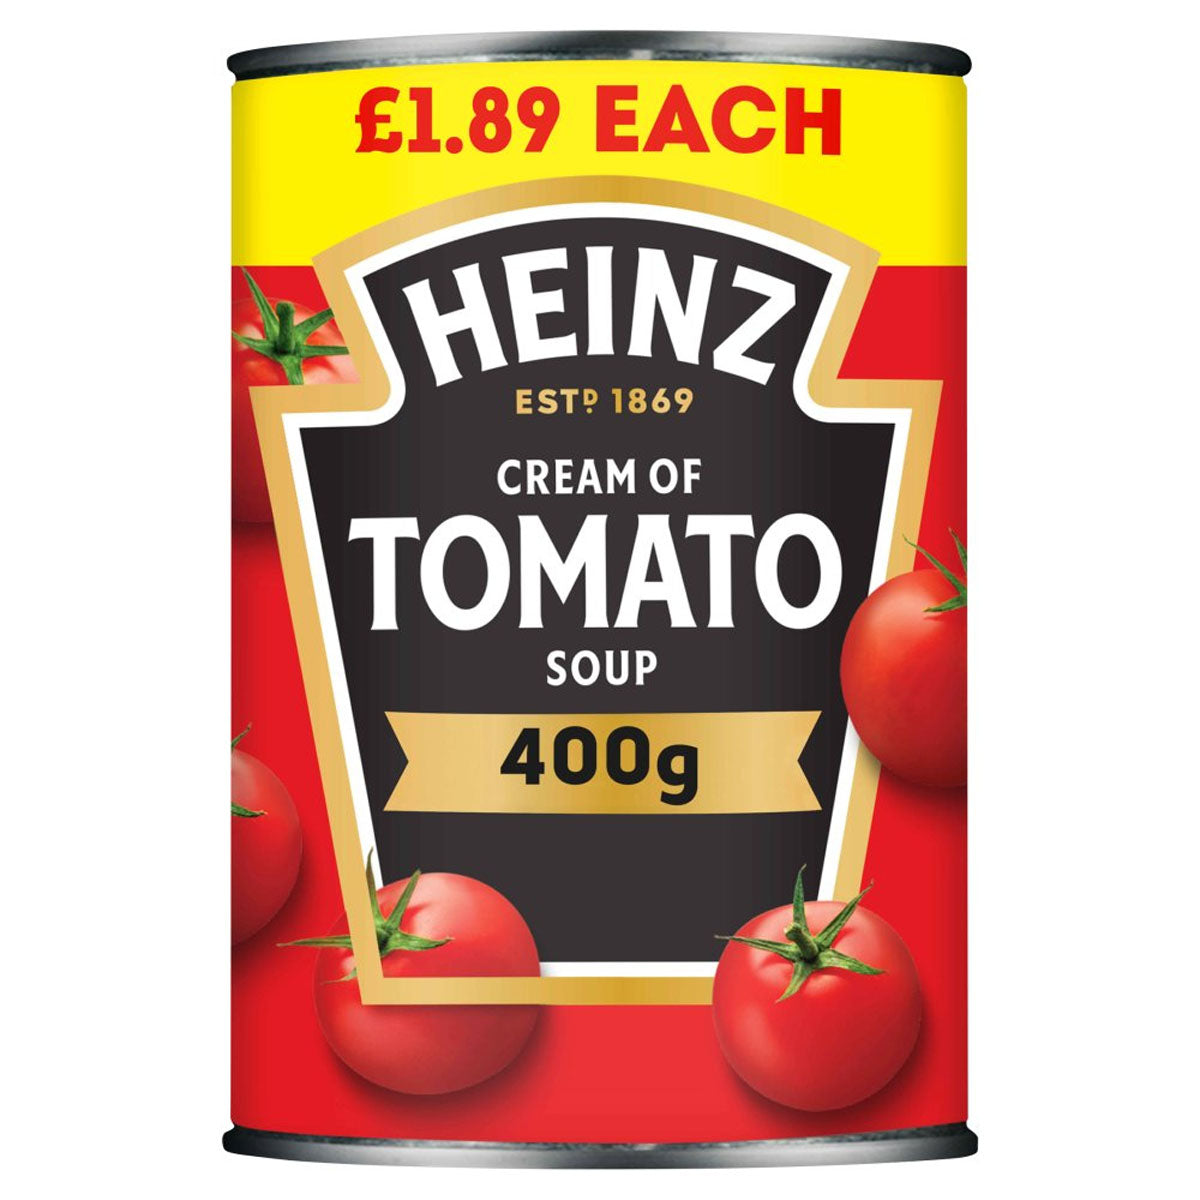 Heinz - Cream of Tomato Soup - 400g - Continental Food Store